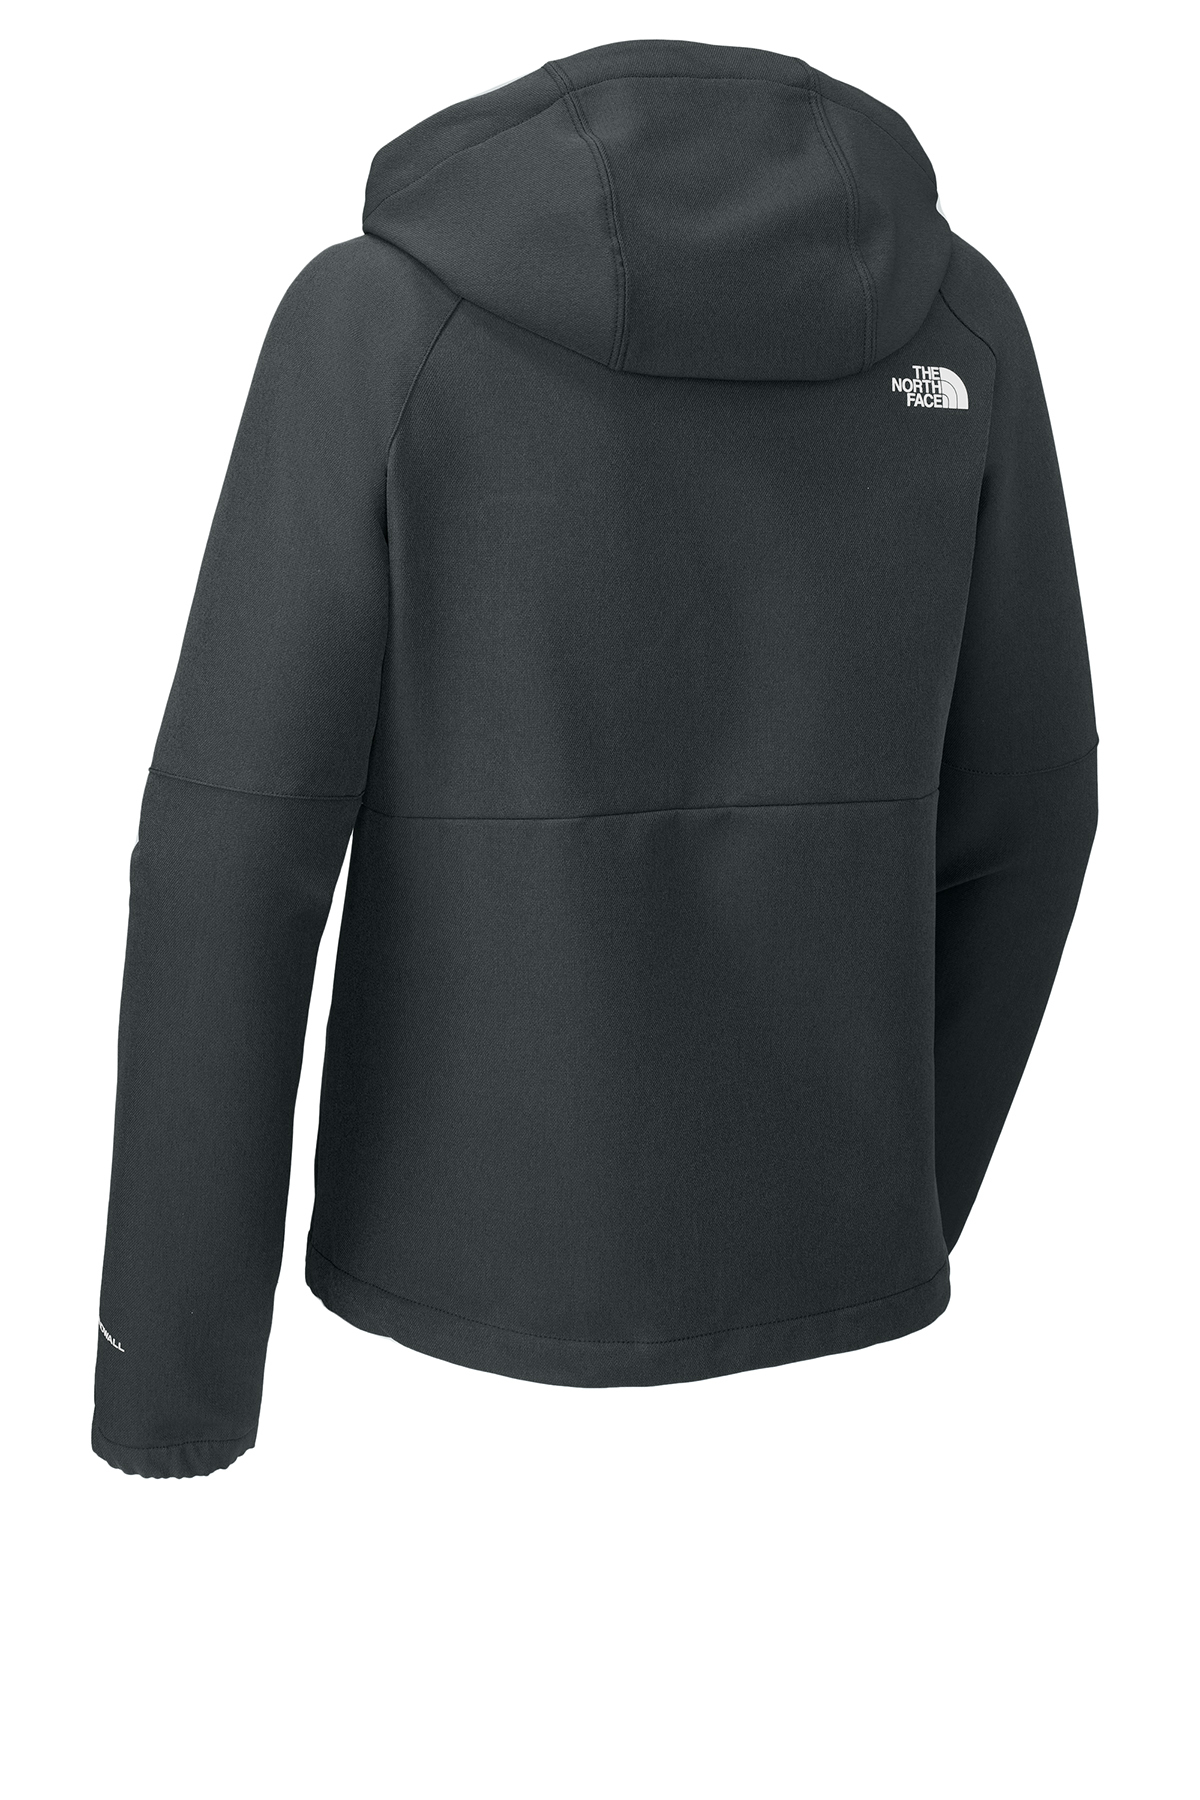 The North Face Ladies Barr Lake Hooded Soft Shell Jacket | Product | SanMar